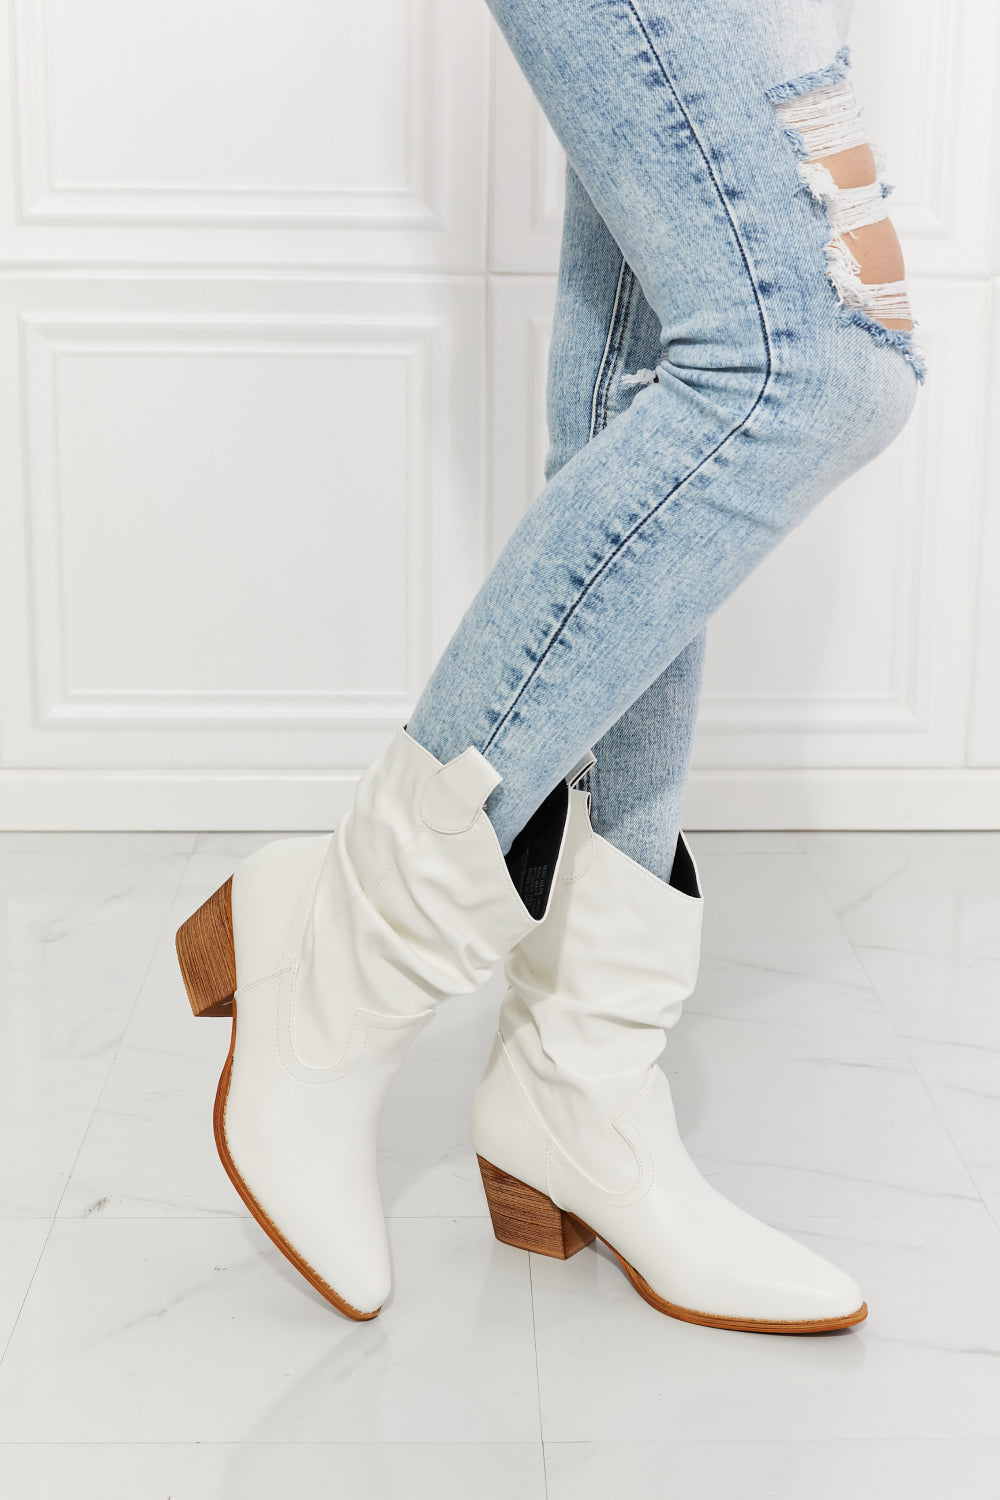 MMShoes Scrunch Cowboy Cowgirl Bootie Ankle Boots with Heel in White Better in Texas